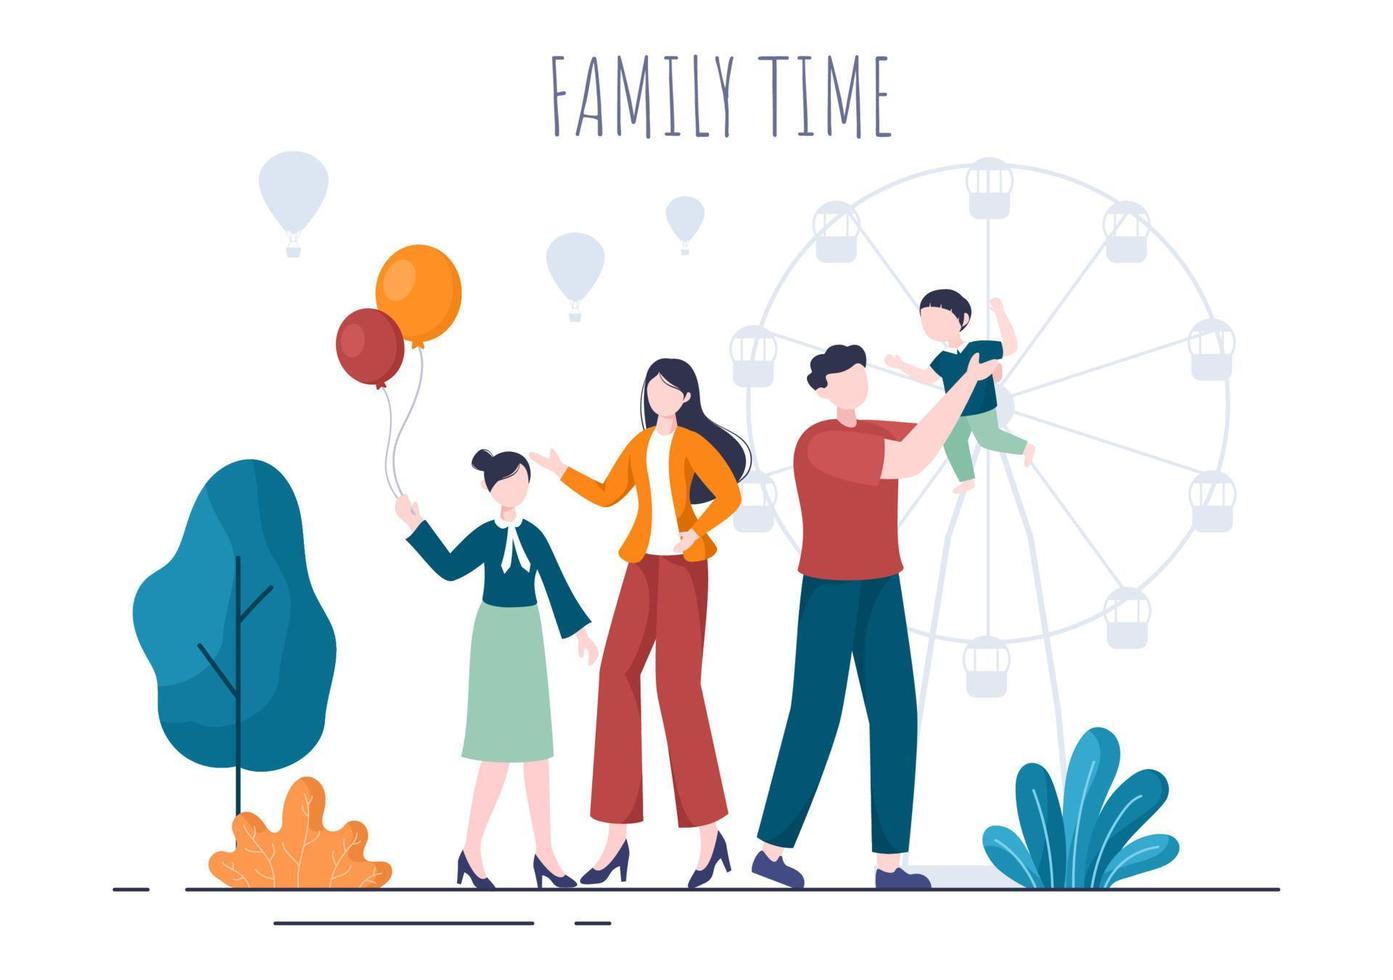 Family Time of Joyful Parents and Children Spending Time Together at Park Doing Various Relaxing Activities in Cartoon Flat Illustration for Poster or Background vector